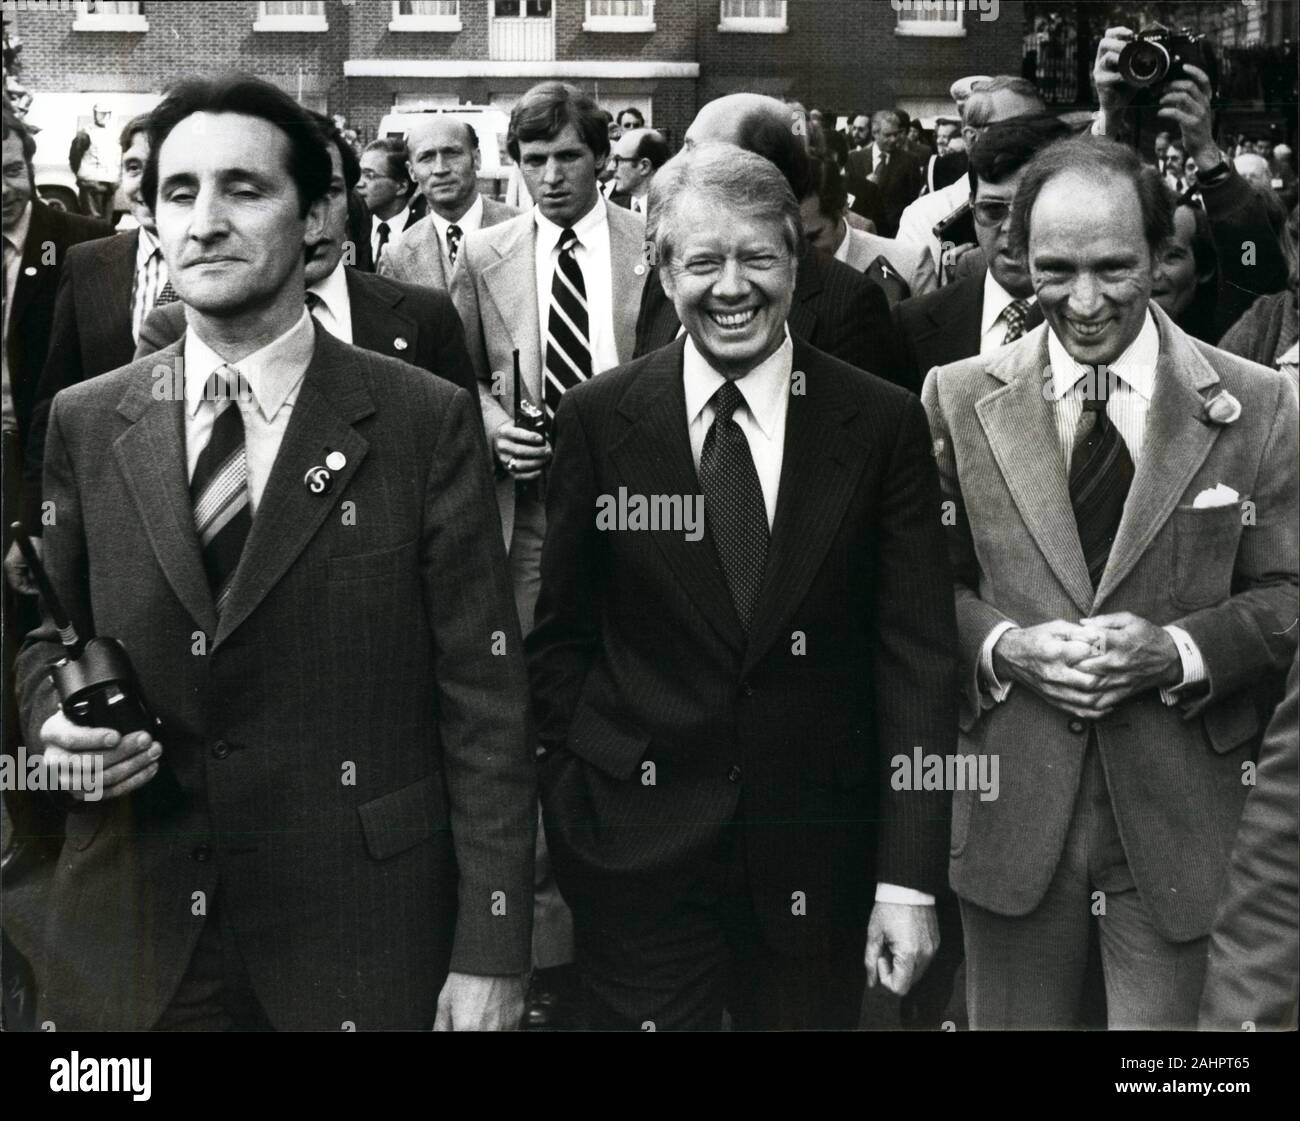 May 7, 1977 - London, England, United Kingdom - The seven International Leaders from Britain, France, Canada, Japan, United States, Germany, and Italy held their first session today at Downing Street. US President JIMMY CARTER, center, walks with Prime Minister PIERRE TRUDEAU, right, during a the lunch break in the Summit talks. (Credit Image: © Keystone Press Agency/Keystone USA via ZUMAPRESS.com) Stock Photo